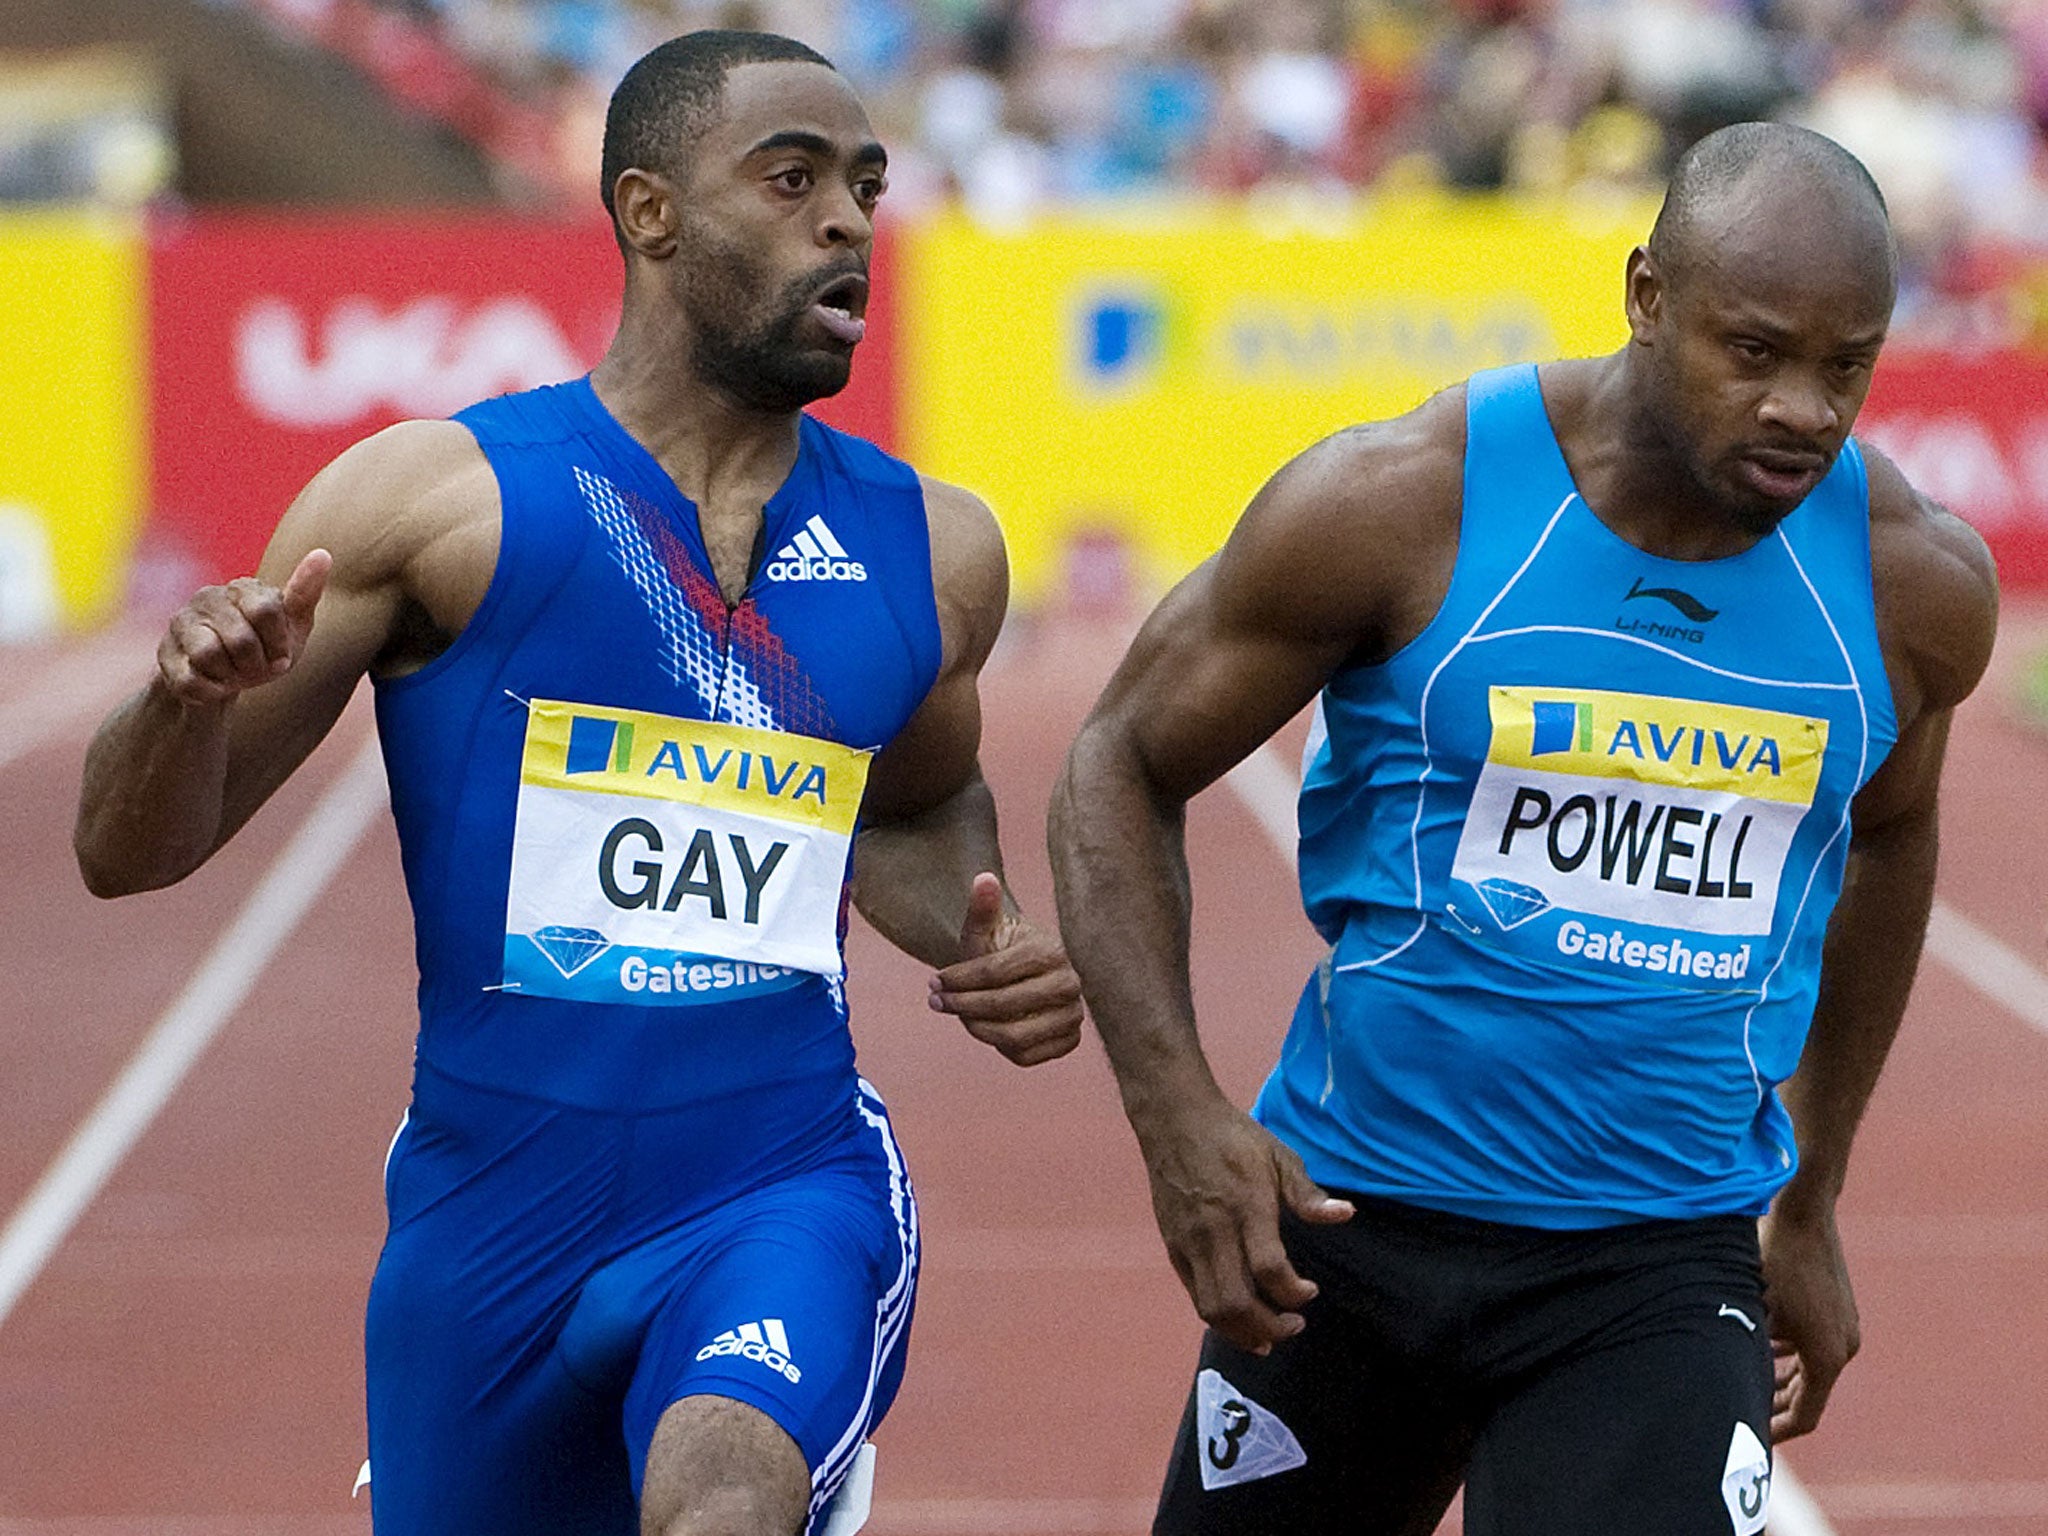 Running into trouble: Tyson Gay and Asafa Powell tested positive